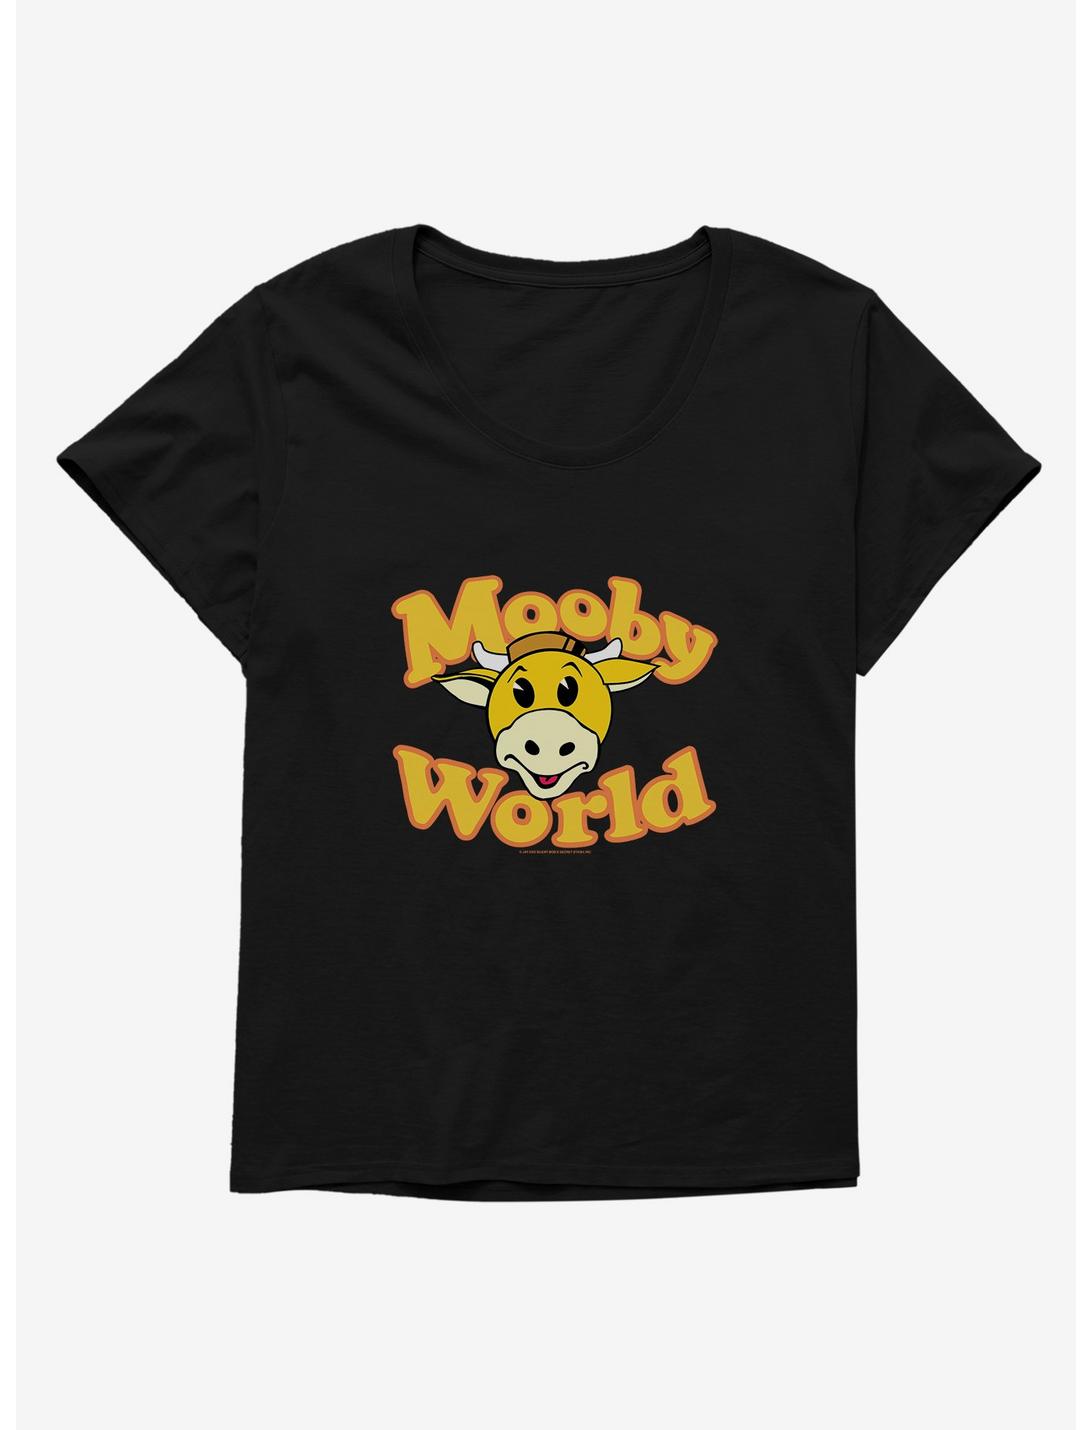 Clerks 3 Mooby World Girls T-Shirt Plus Size, , hi-res